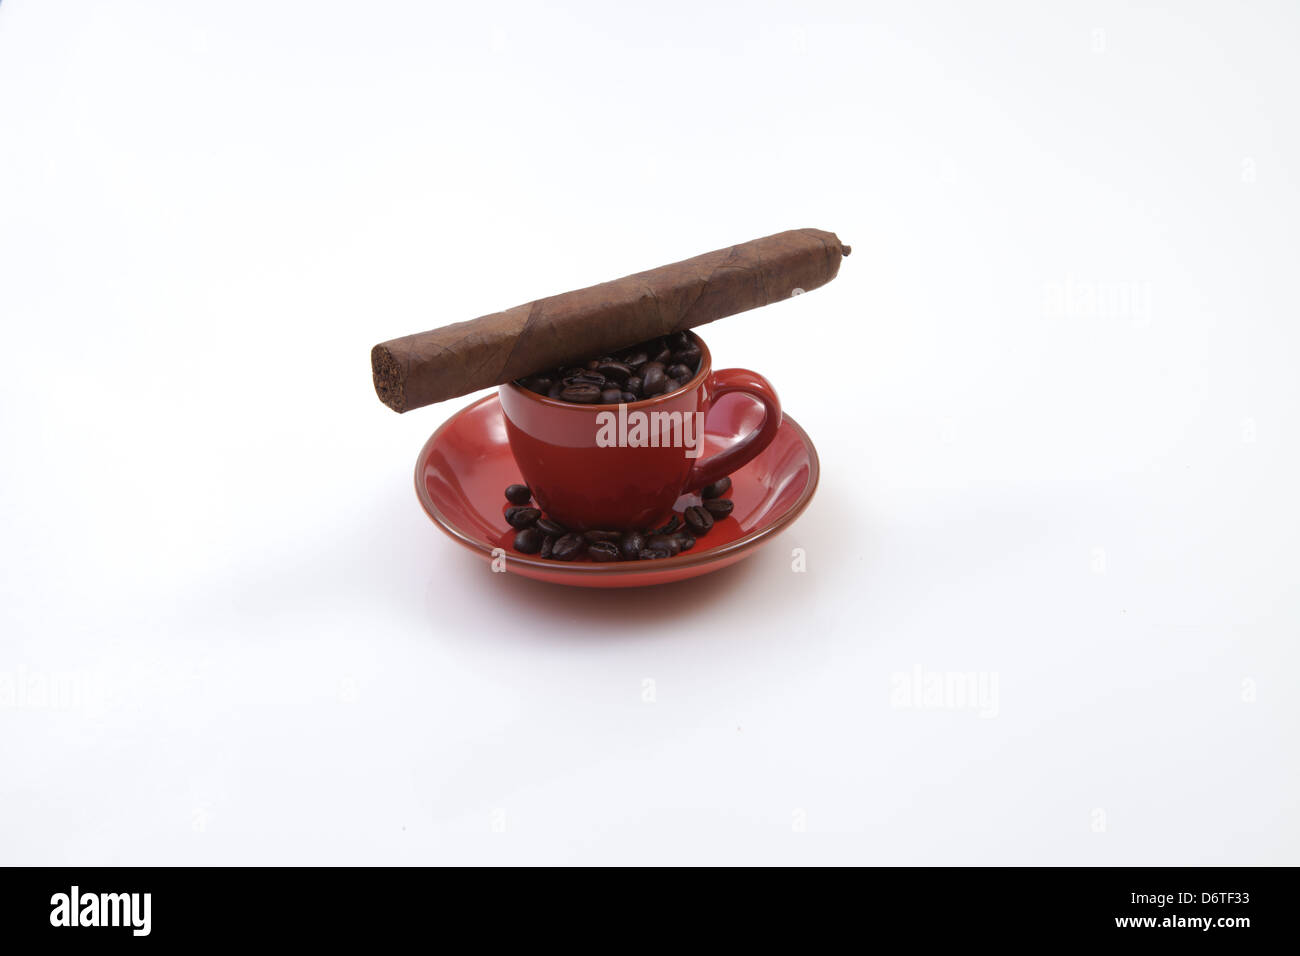 https://c8.alamy.com/comp/D6TF33/cigar-and-red-cuban-coffee-cup-filled-with-coffee-beans-D6TF33.jpg